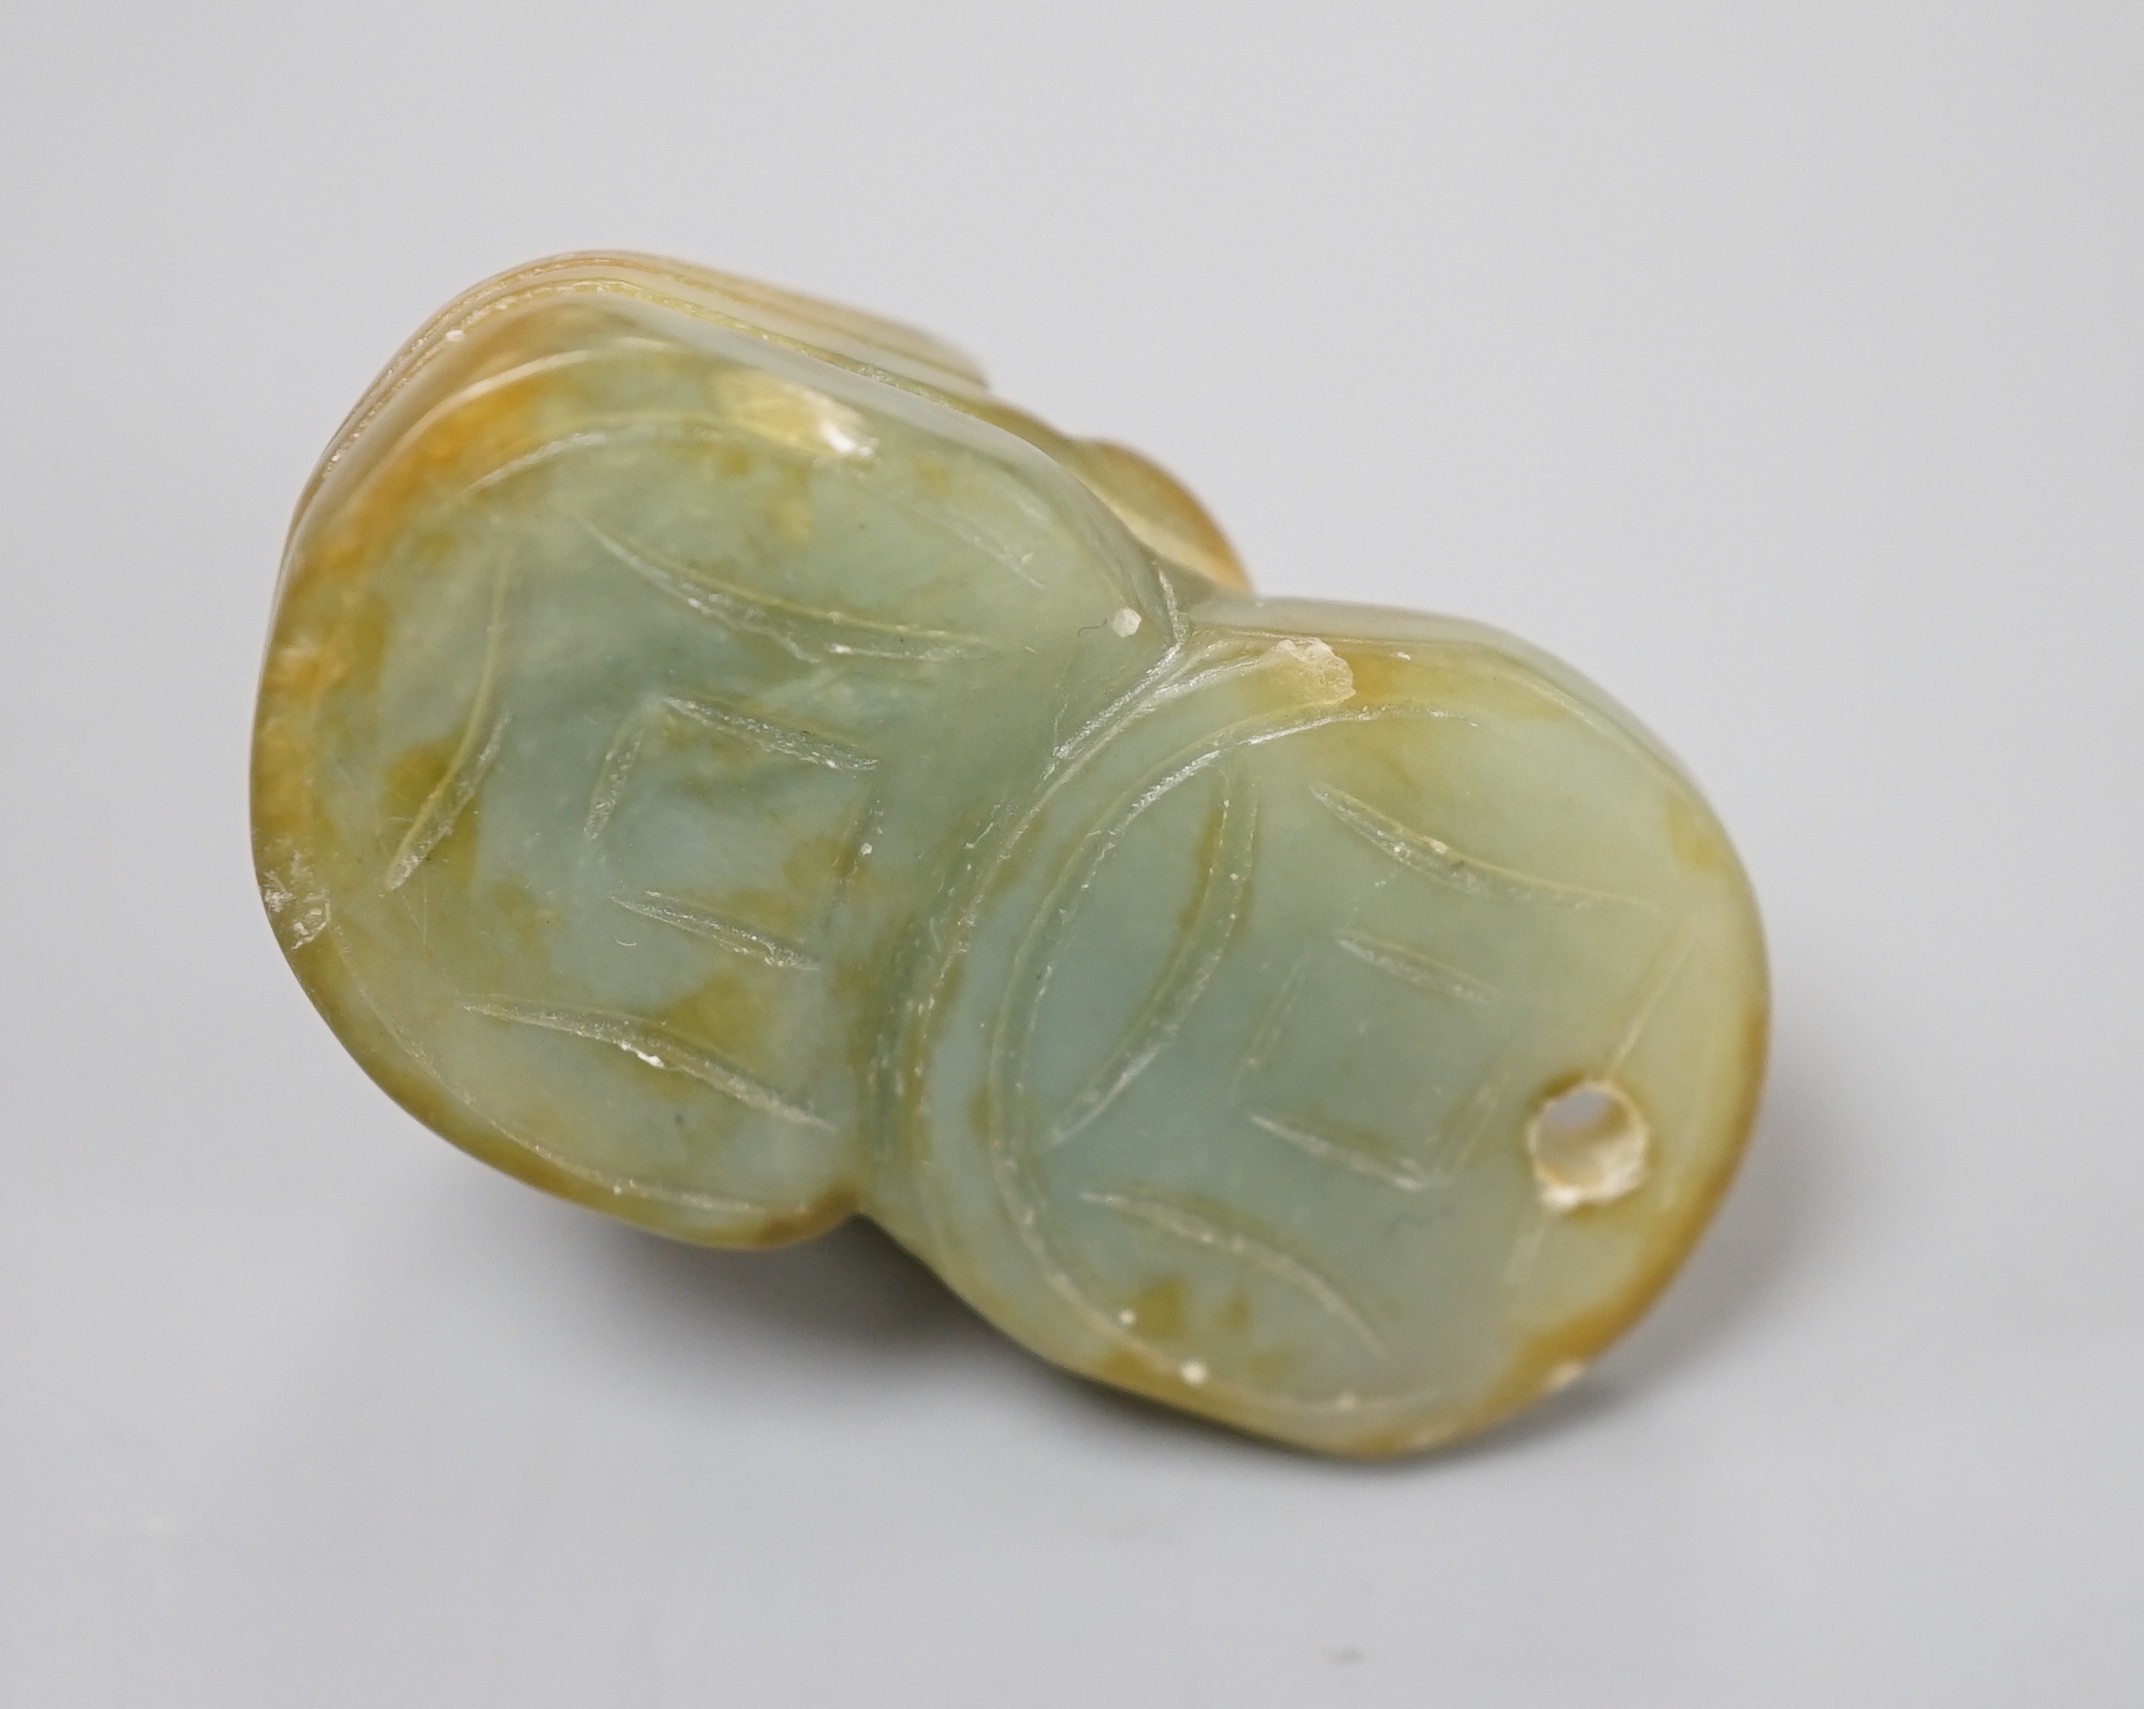 A Chinese jade fish and cash pendant, 3.4cm